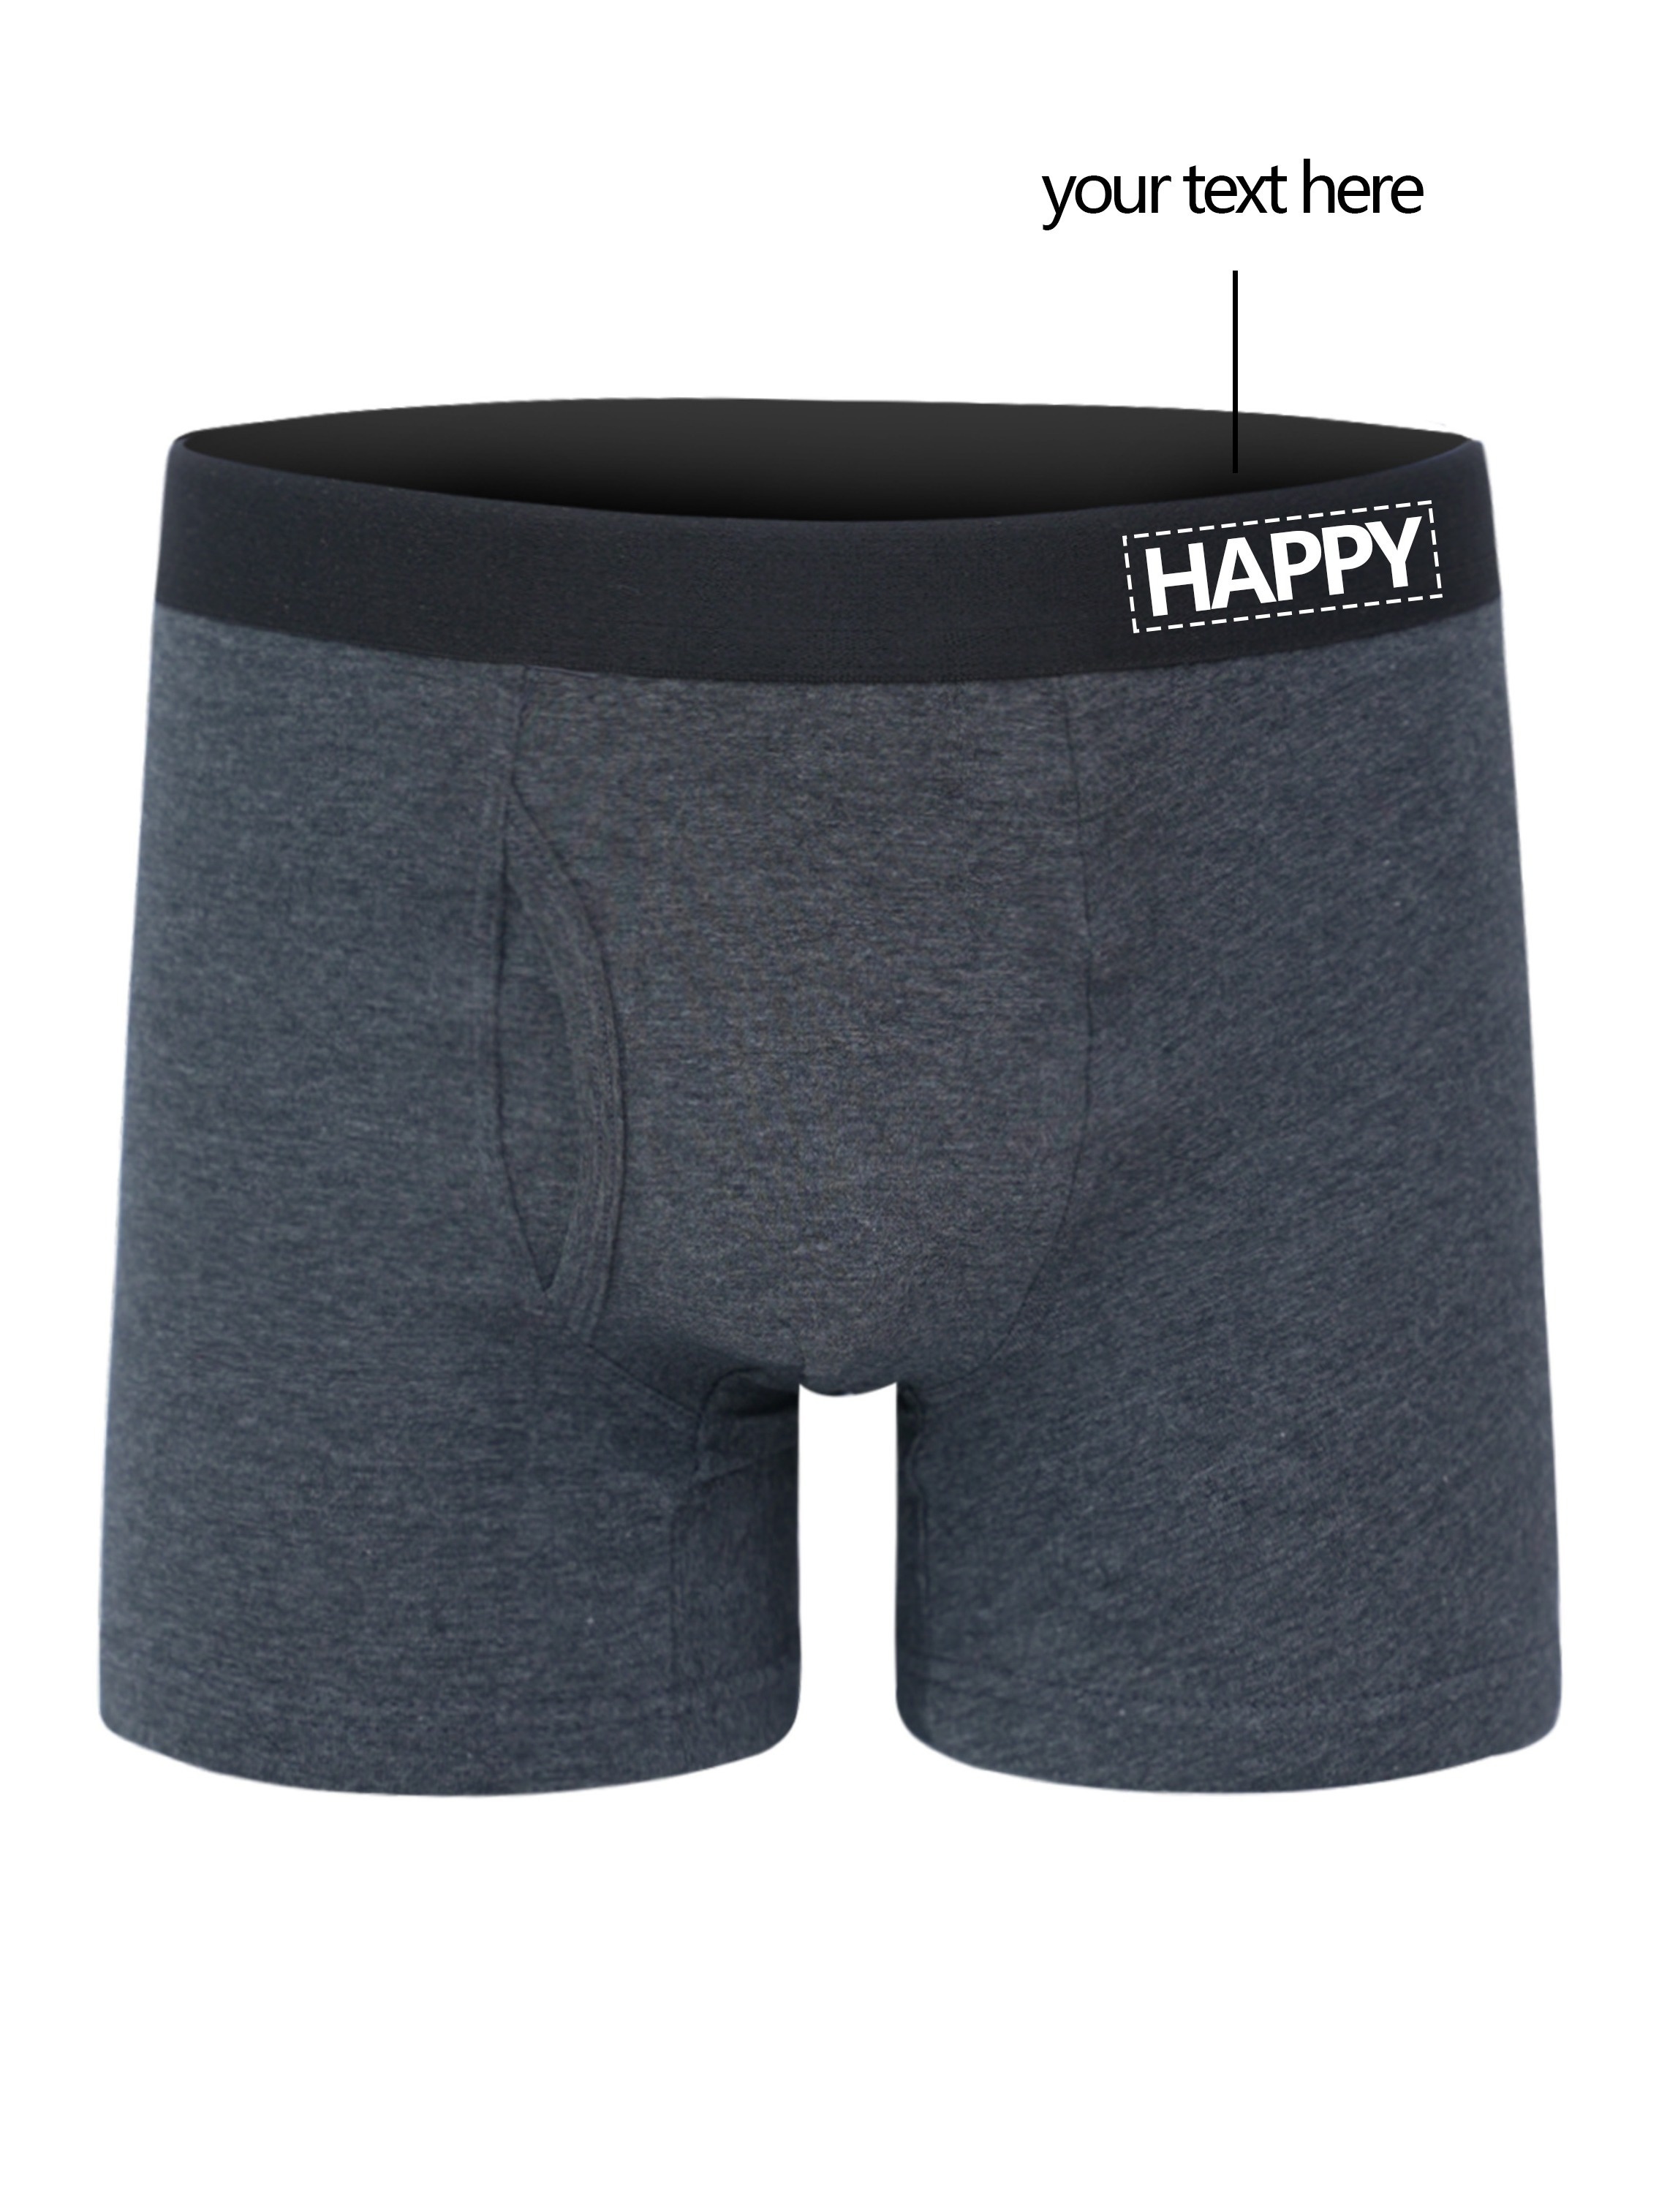 Soft personalized boxer briefs For Comfort 